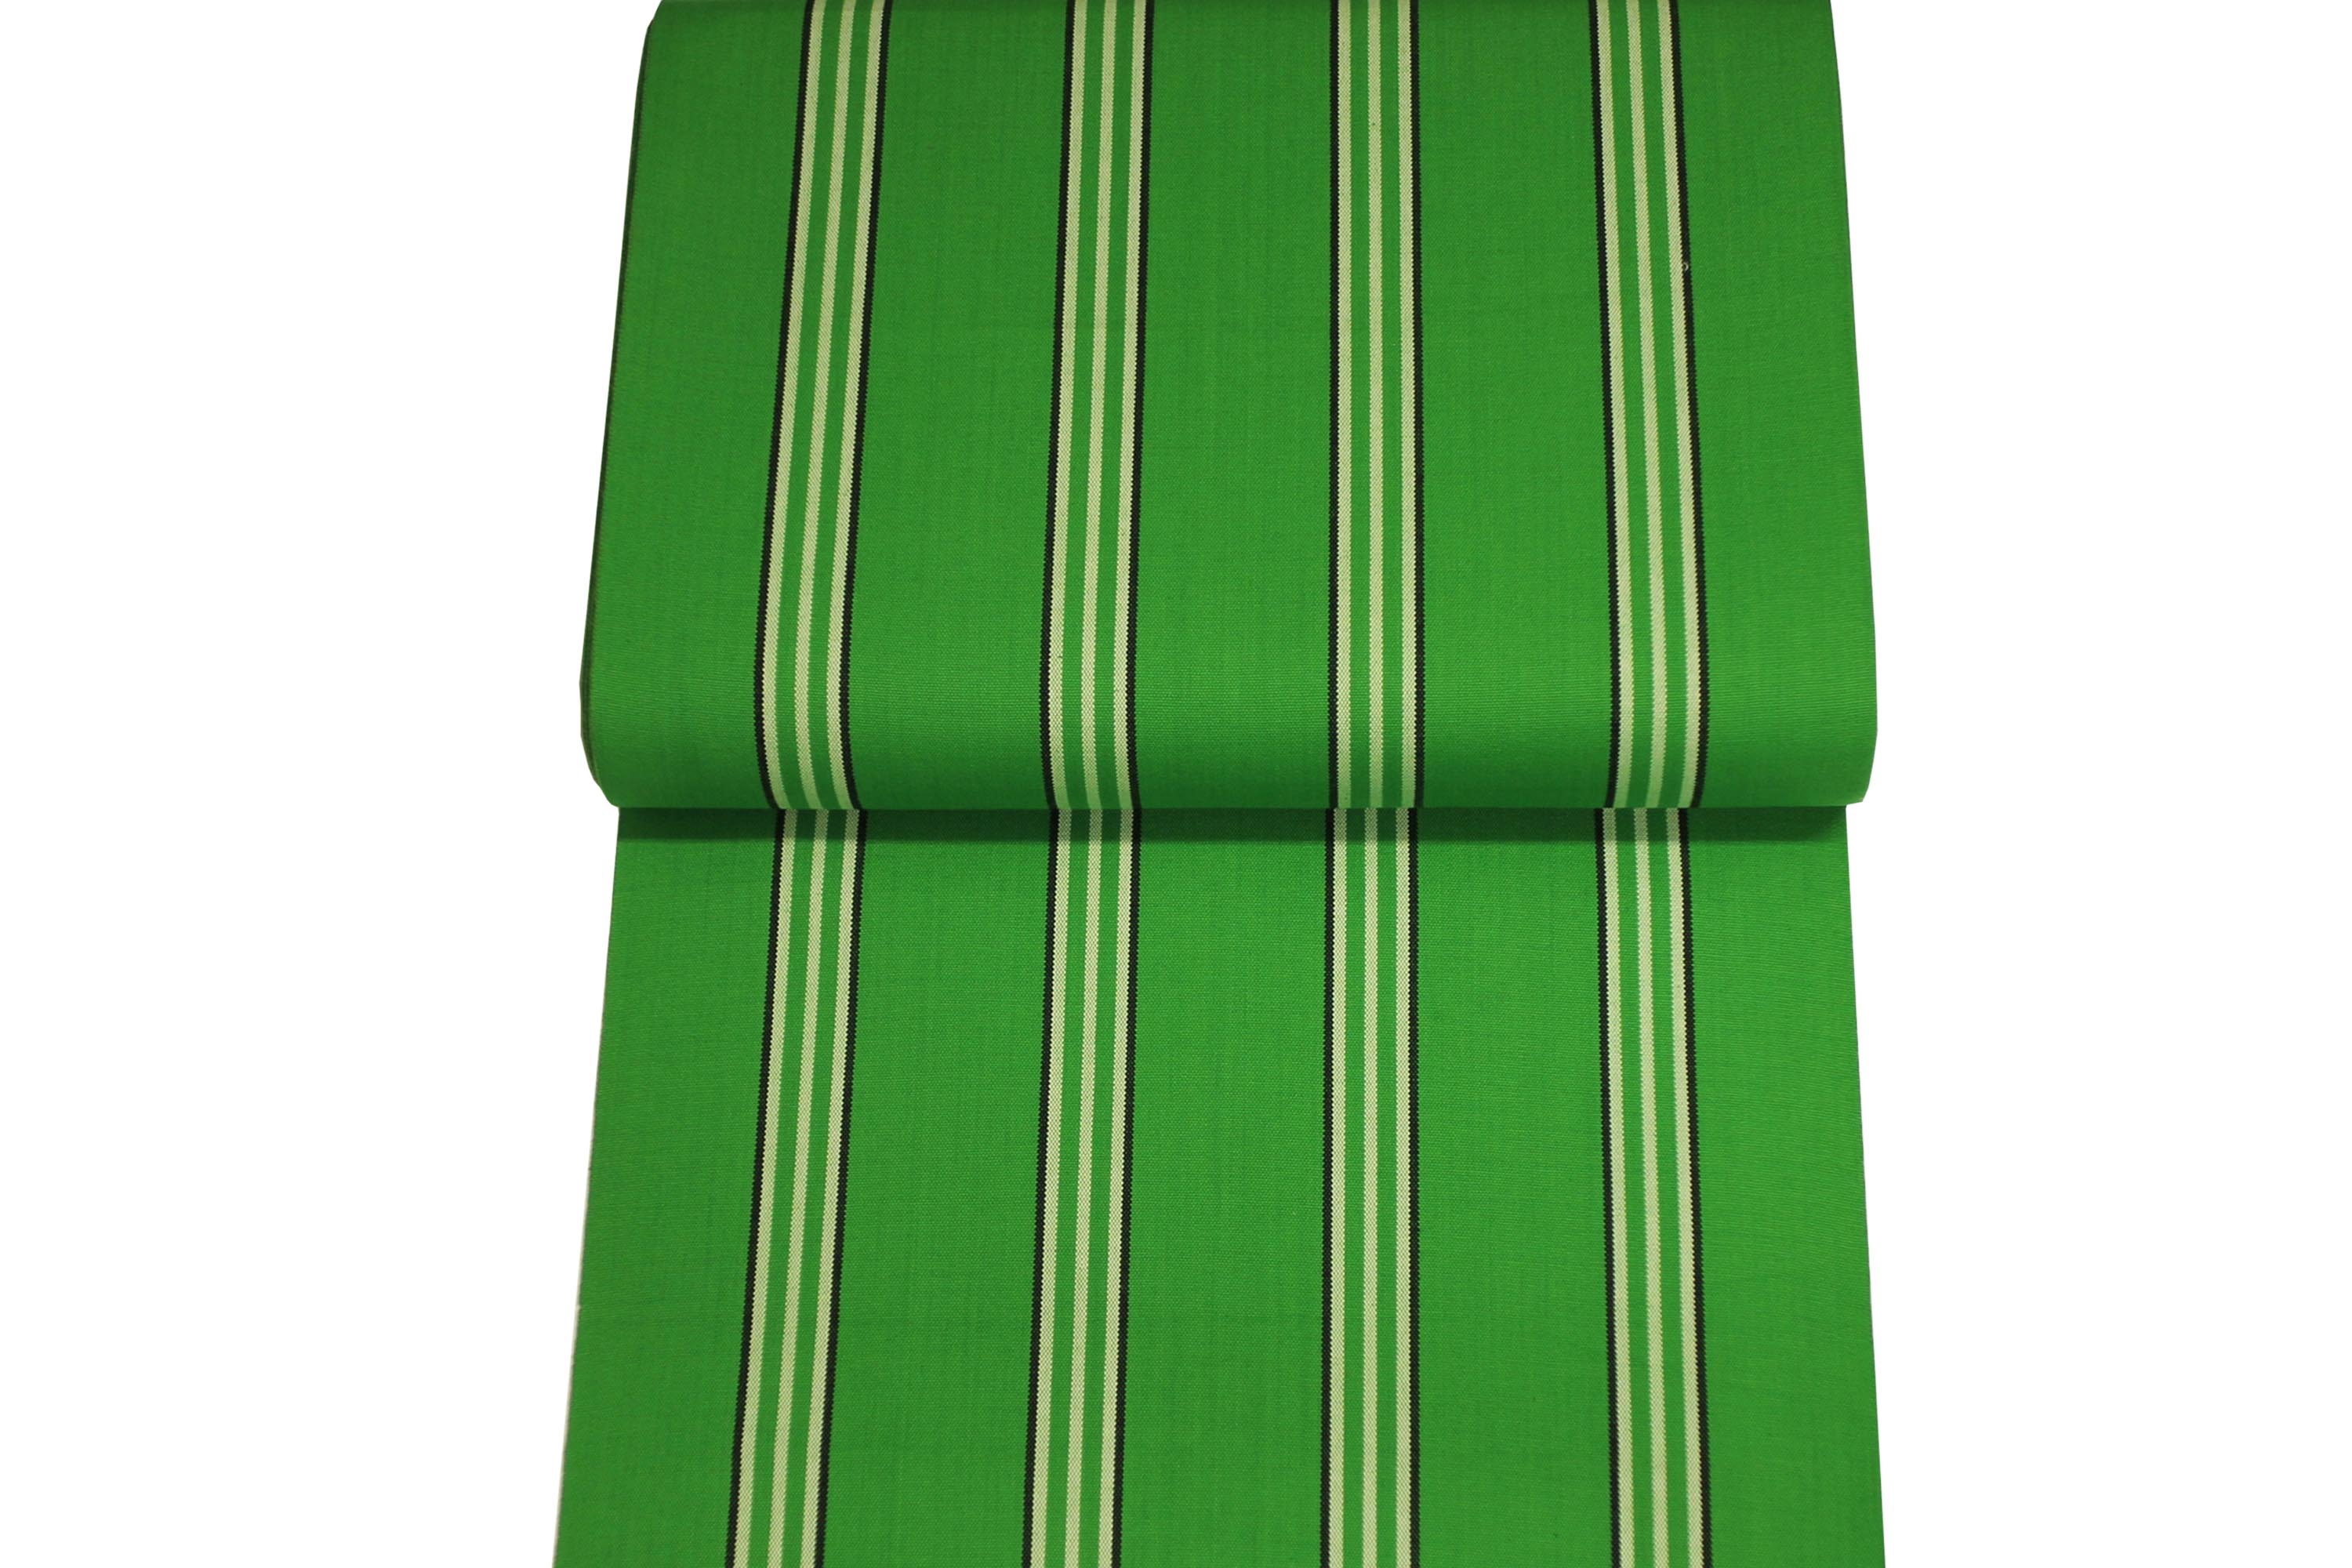  Emerald Green Directors Chair Covers | Replacement Director Chair Covers